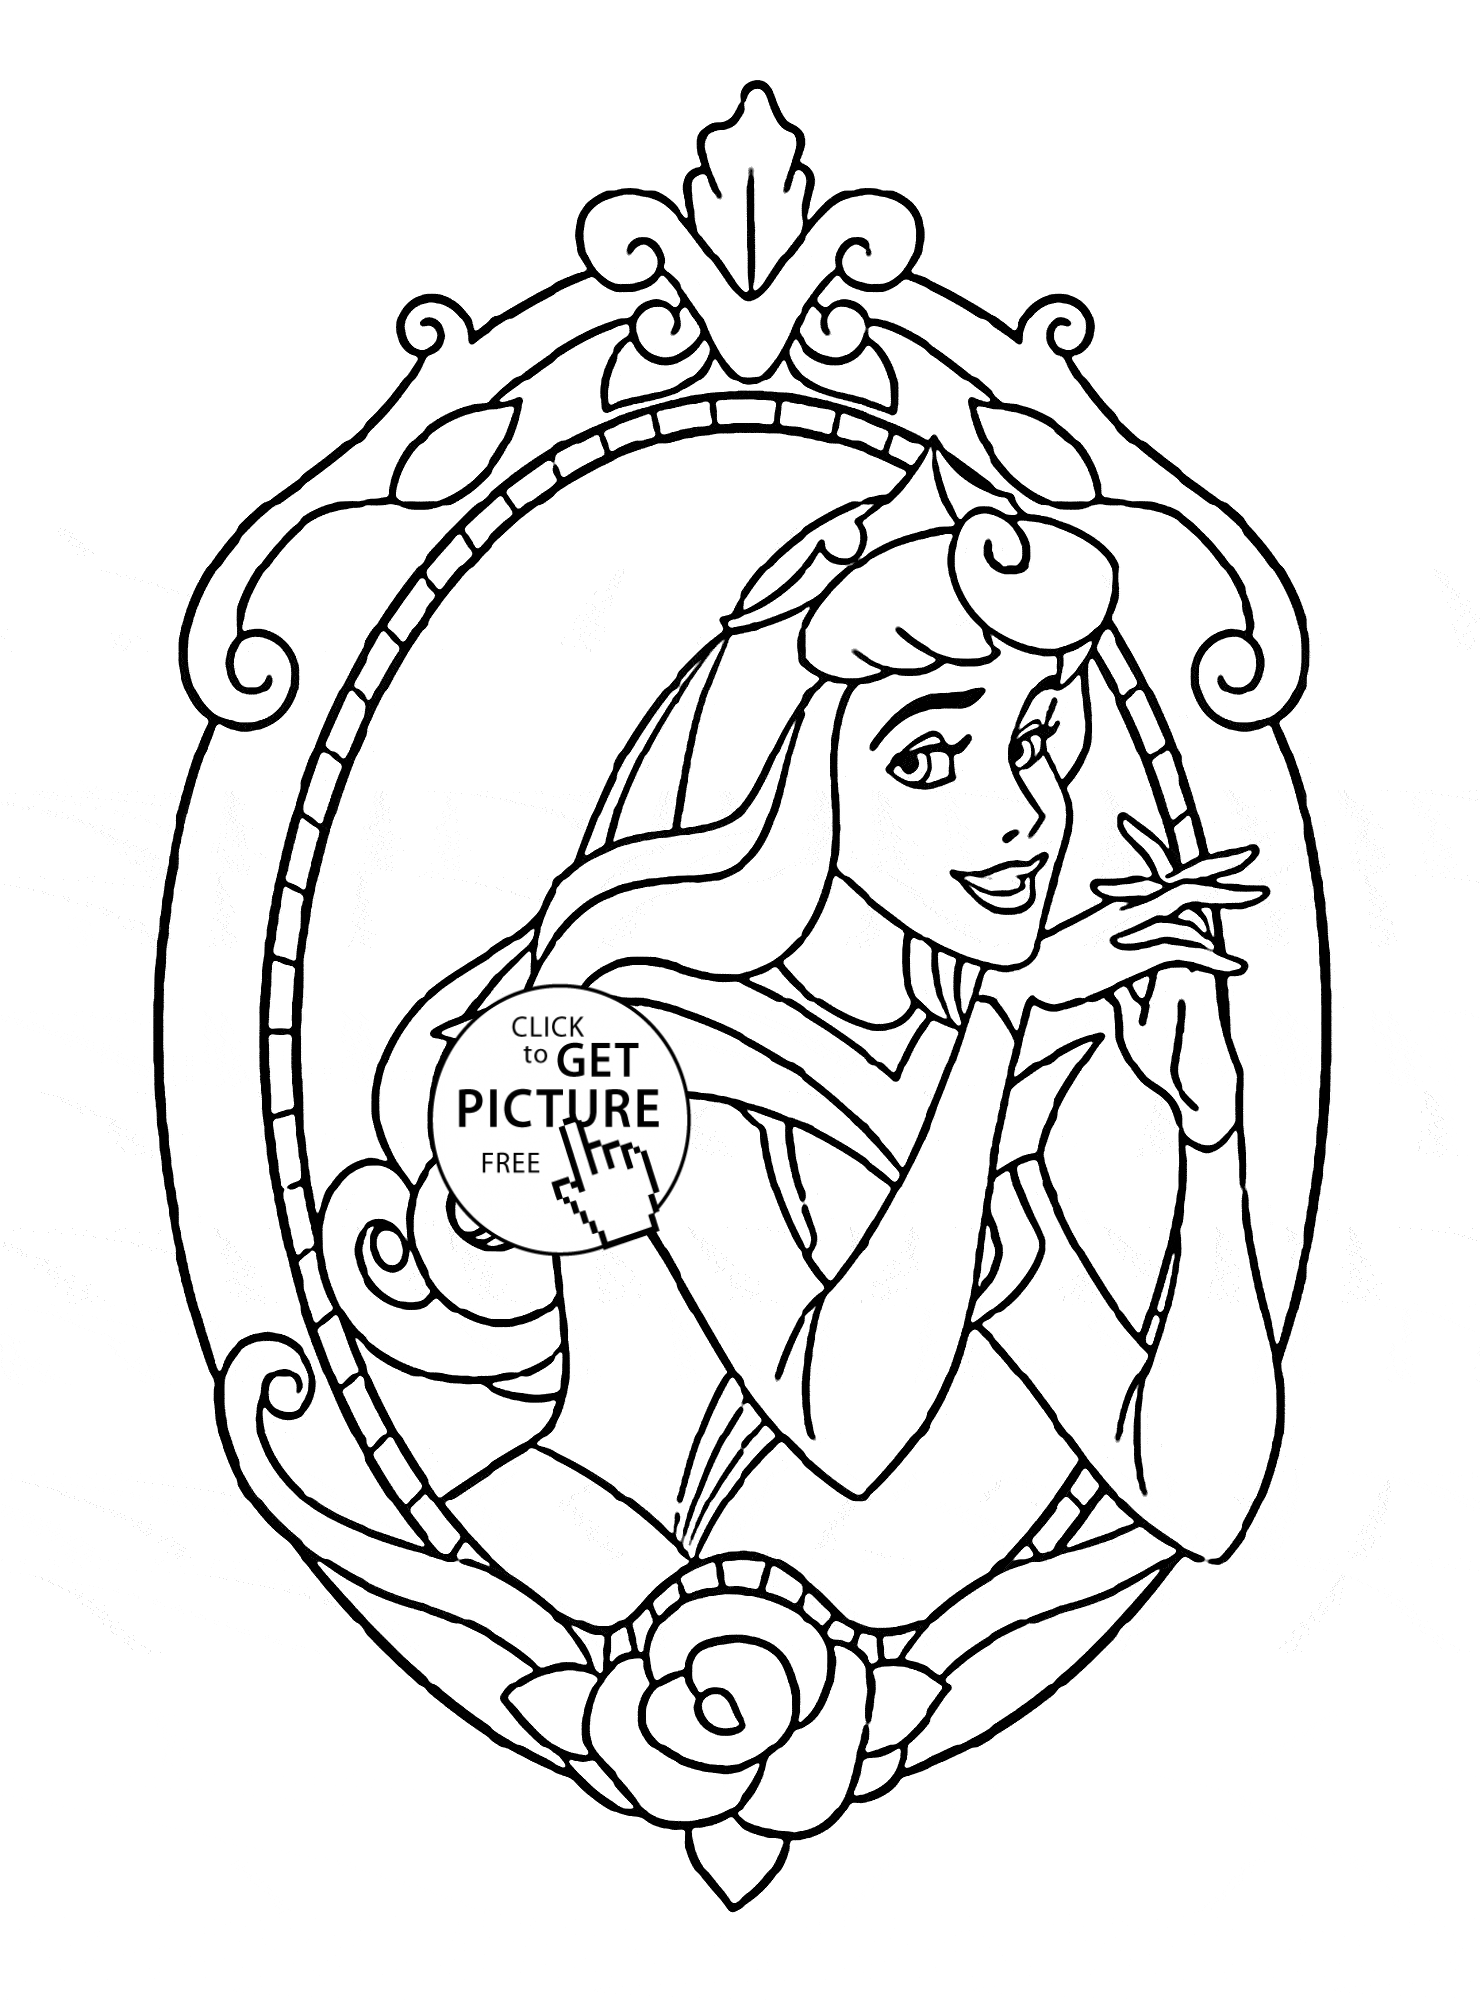 coloring princess aurora disney princesses printable cartoon colouring sheets channel drawing bunkd wuppsy belle popular beauty ariel getdrawings colors printables